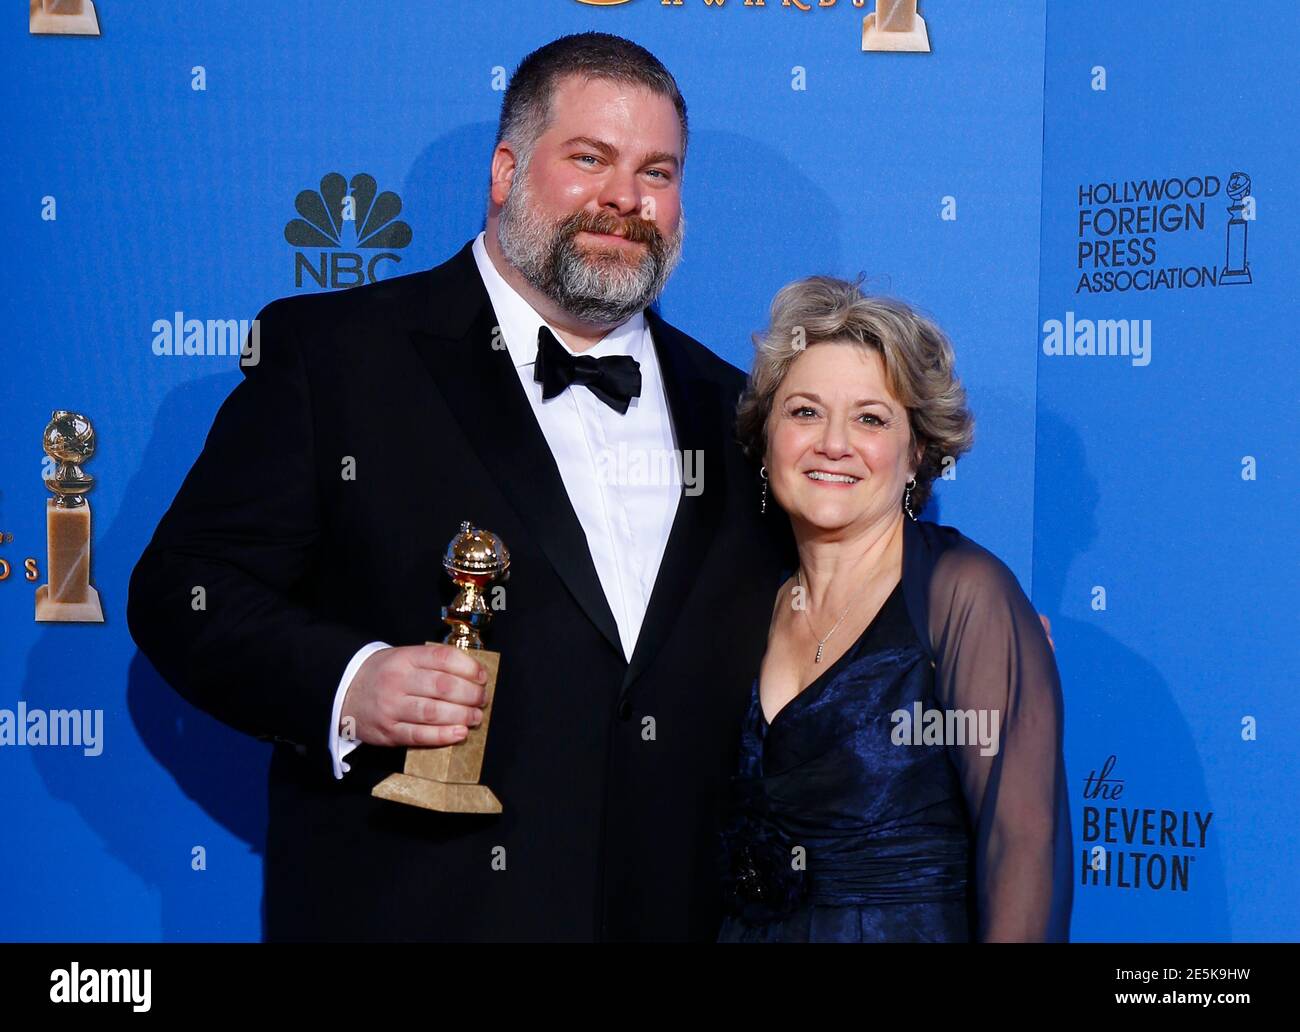 Director Dean Dubois And Producer Bonnie Arnold Pose Backstage After They Won The Award For Best Animated Feature Film For How To Train Your Dragon 2 At The 72nd Golden Globe Awards